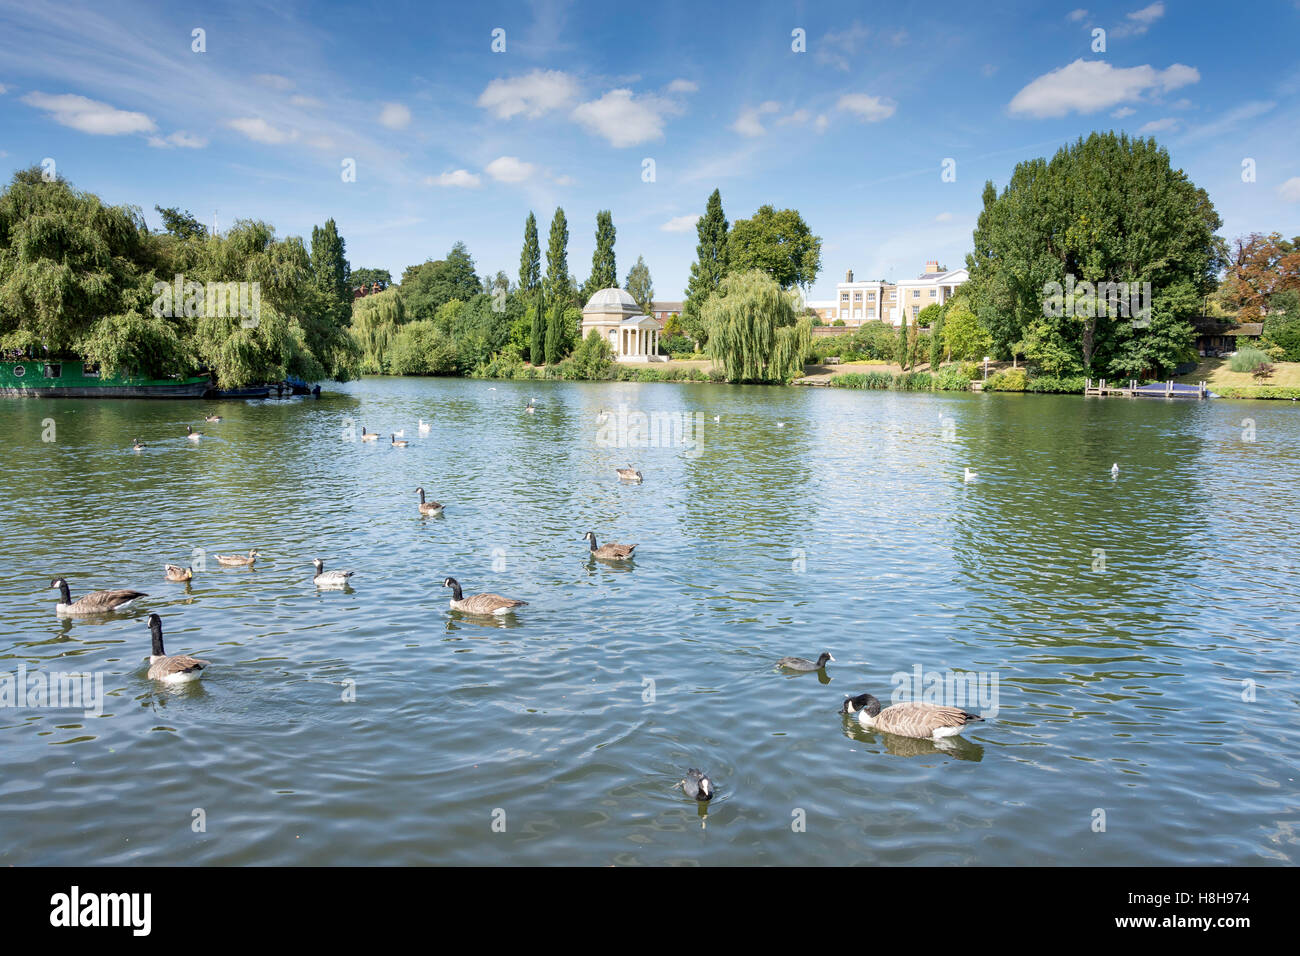 Garrick's Temple across River Thames from Hurst Park, West Molesey, Surrey, England, United Kingdom Stock Photo